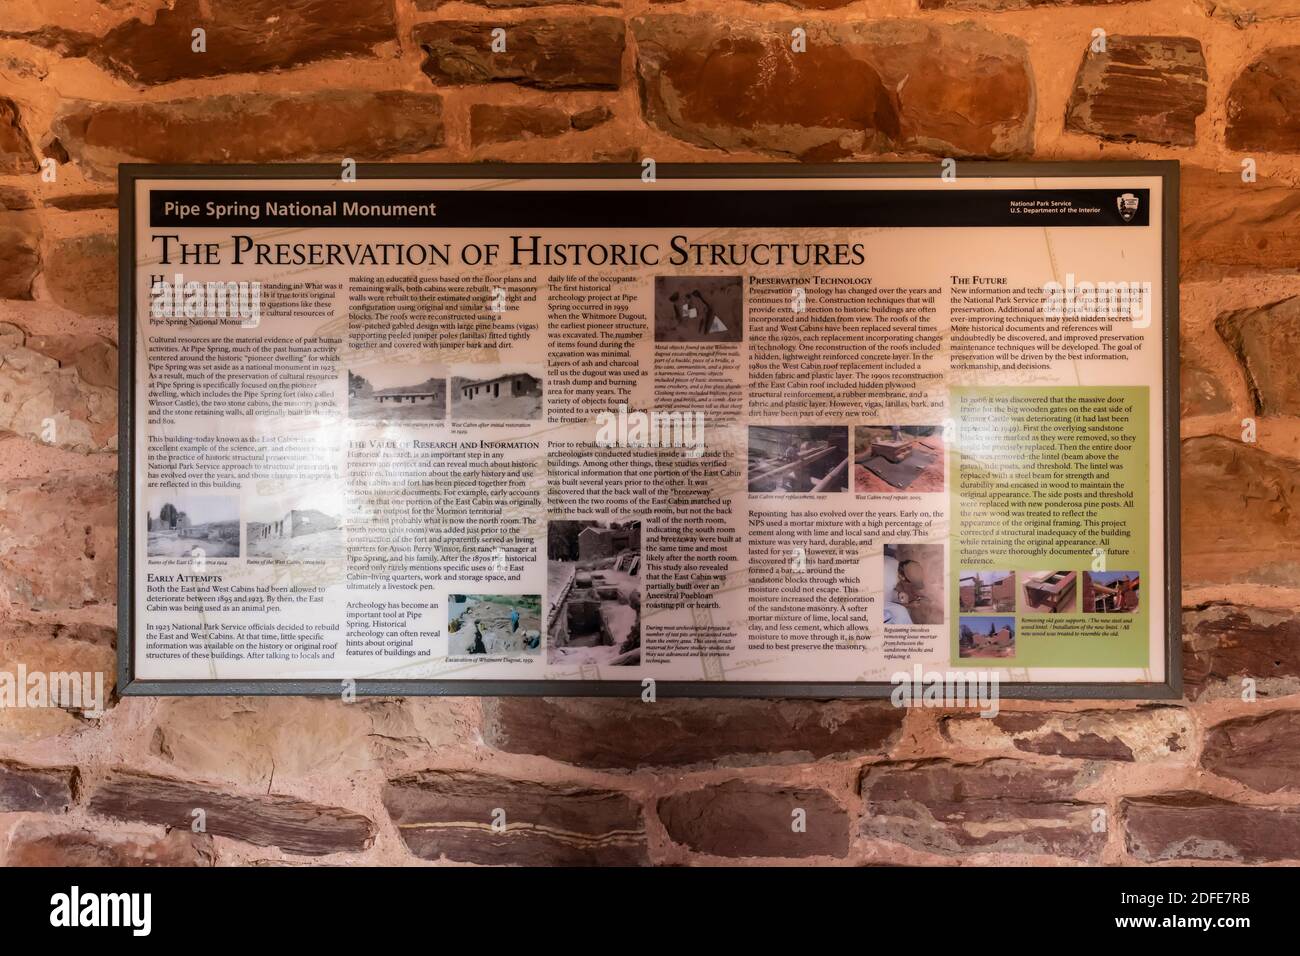 Historic preservation explained in an interpretive sign at Pipe Spring National Monument, Arizona, USA Stock Photo